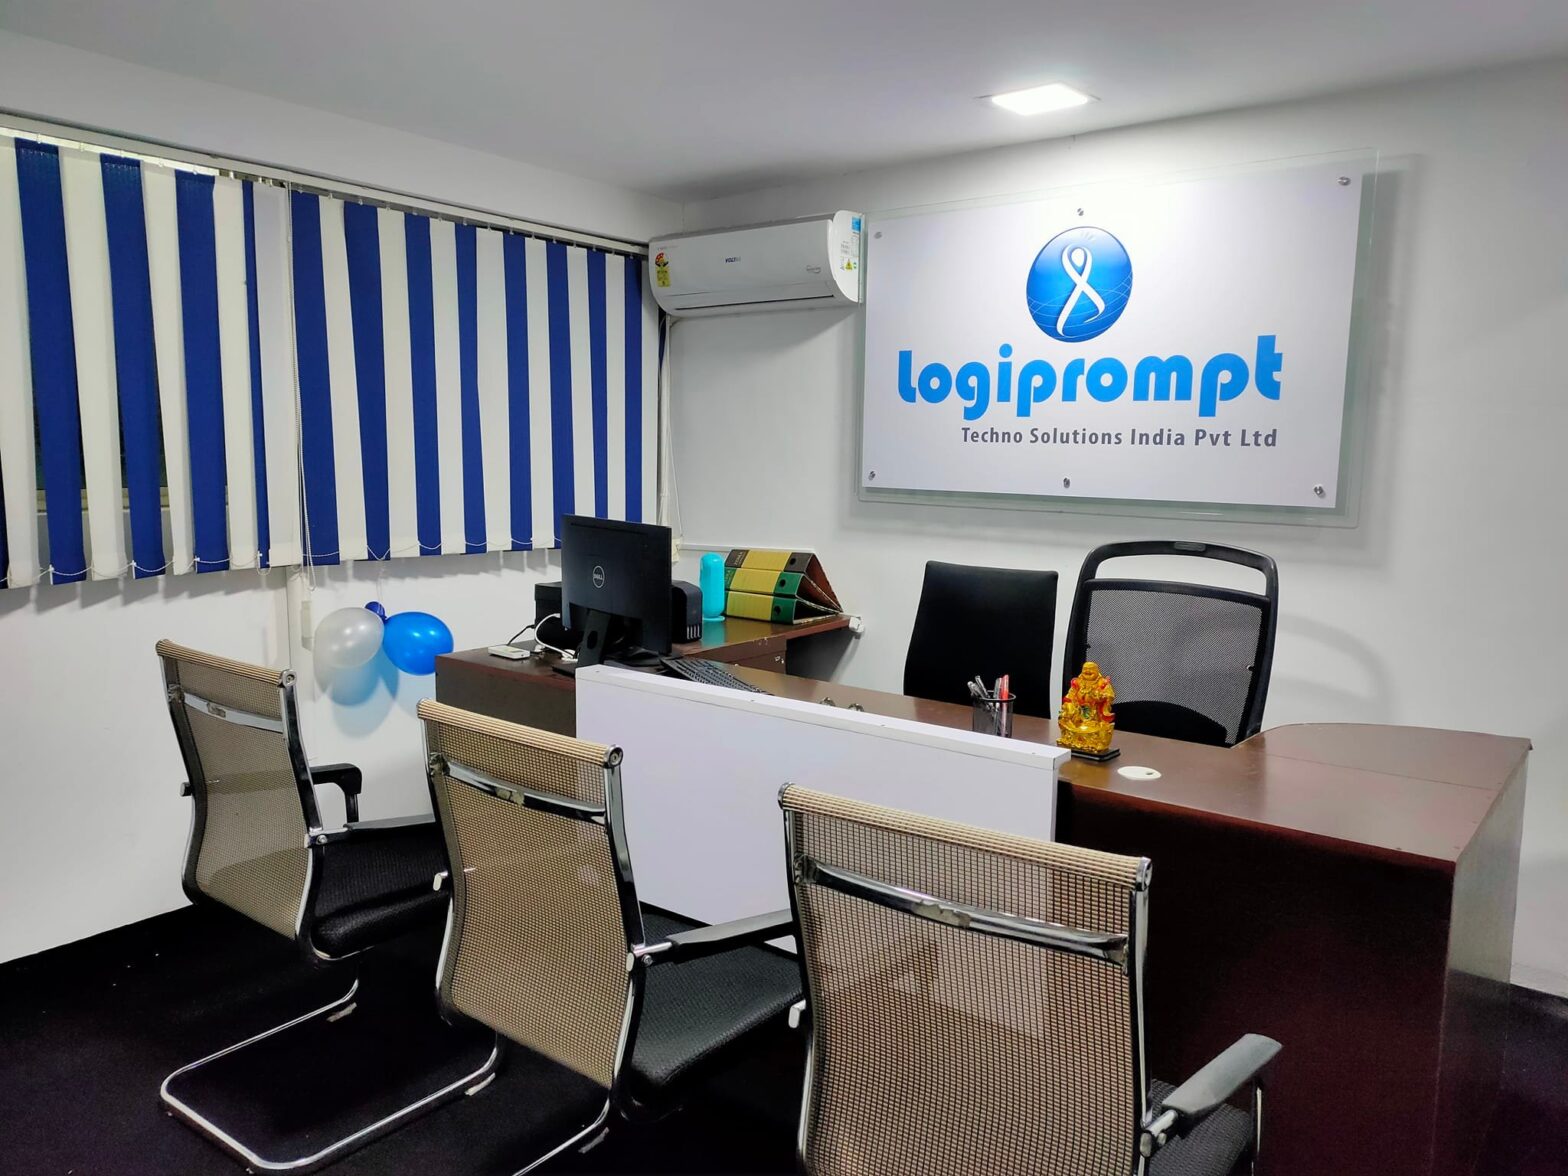 Logiprompt Techno Solutions India Pvt Ltd Office Image 01